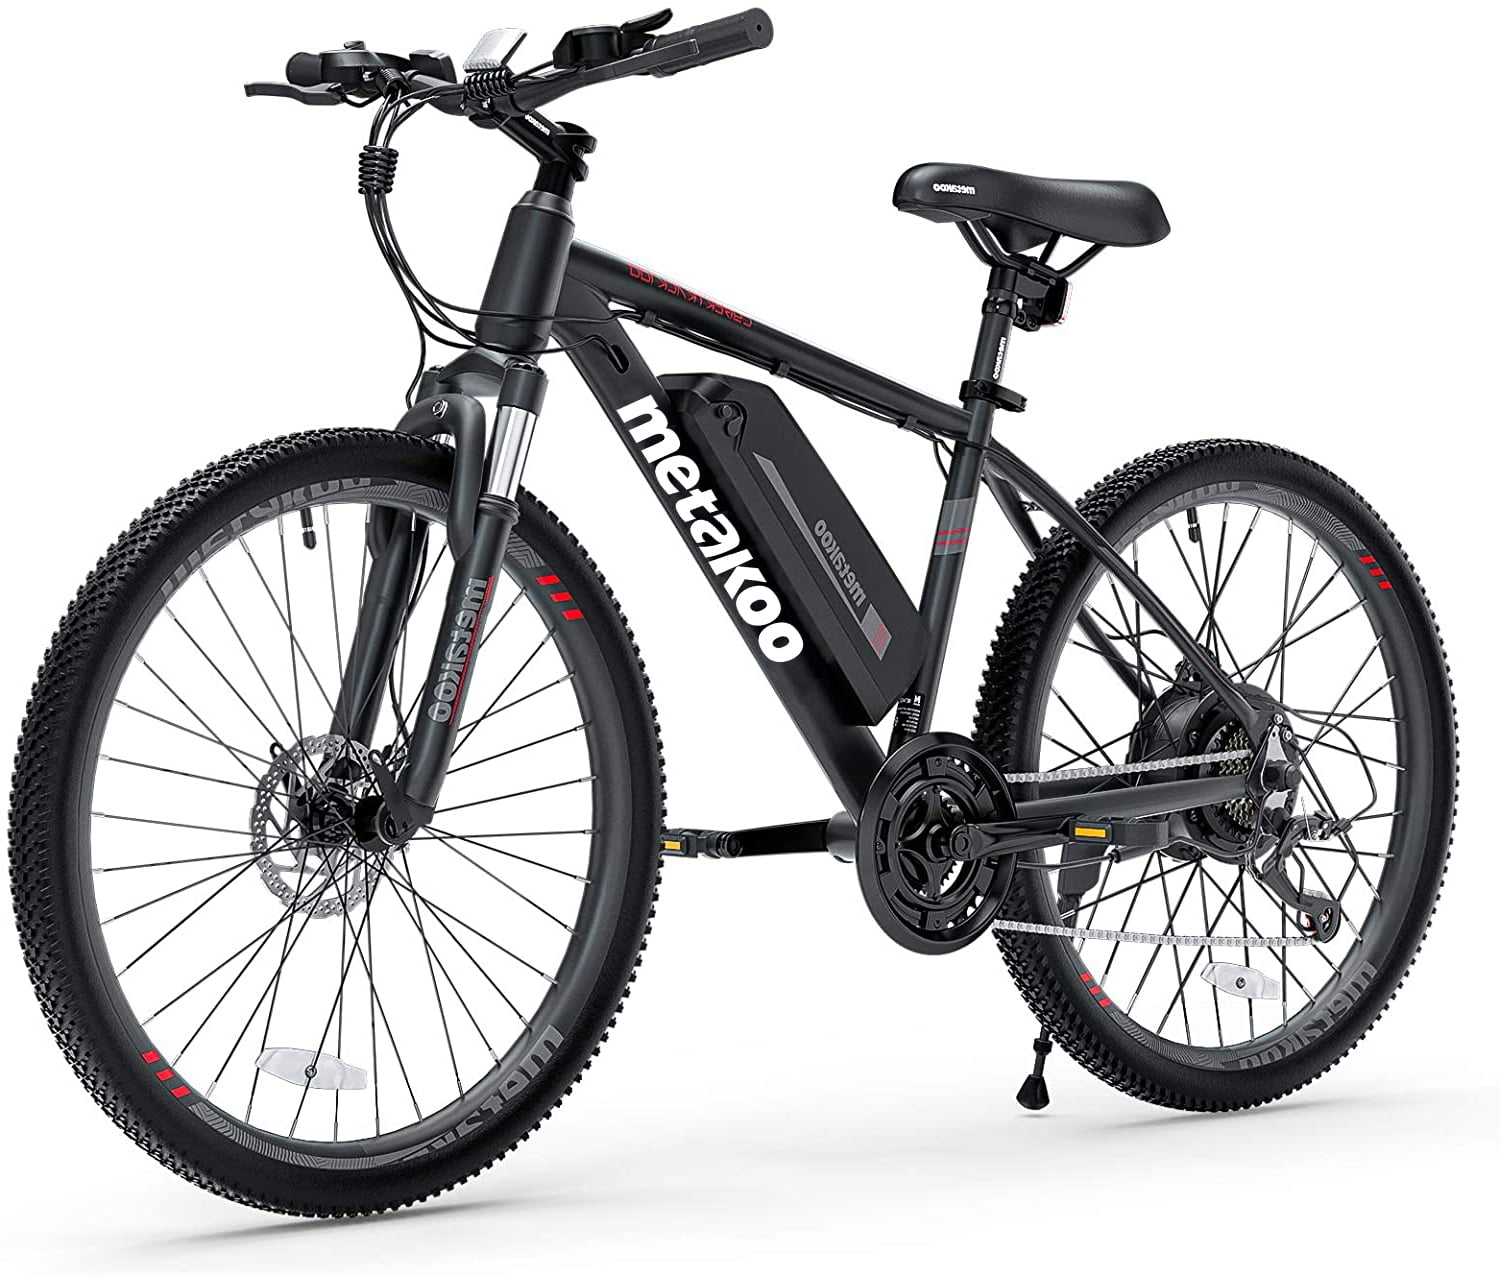 Metakoo 26 In. Mountain Electric Bicycle, 350 W Motor, 3 Hours Fast Charge, 36V Removable Battery, 20Mph with 21 Speed Gears, Black